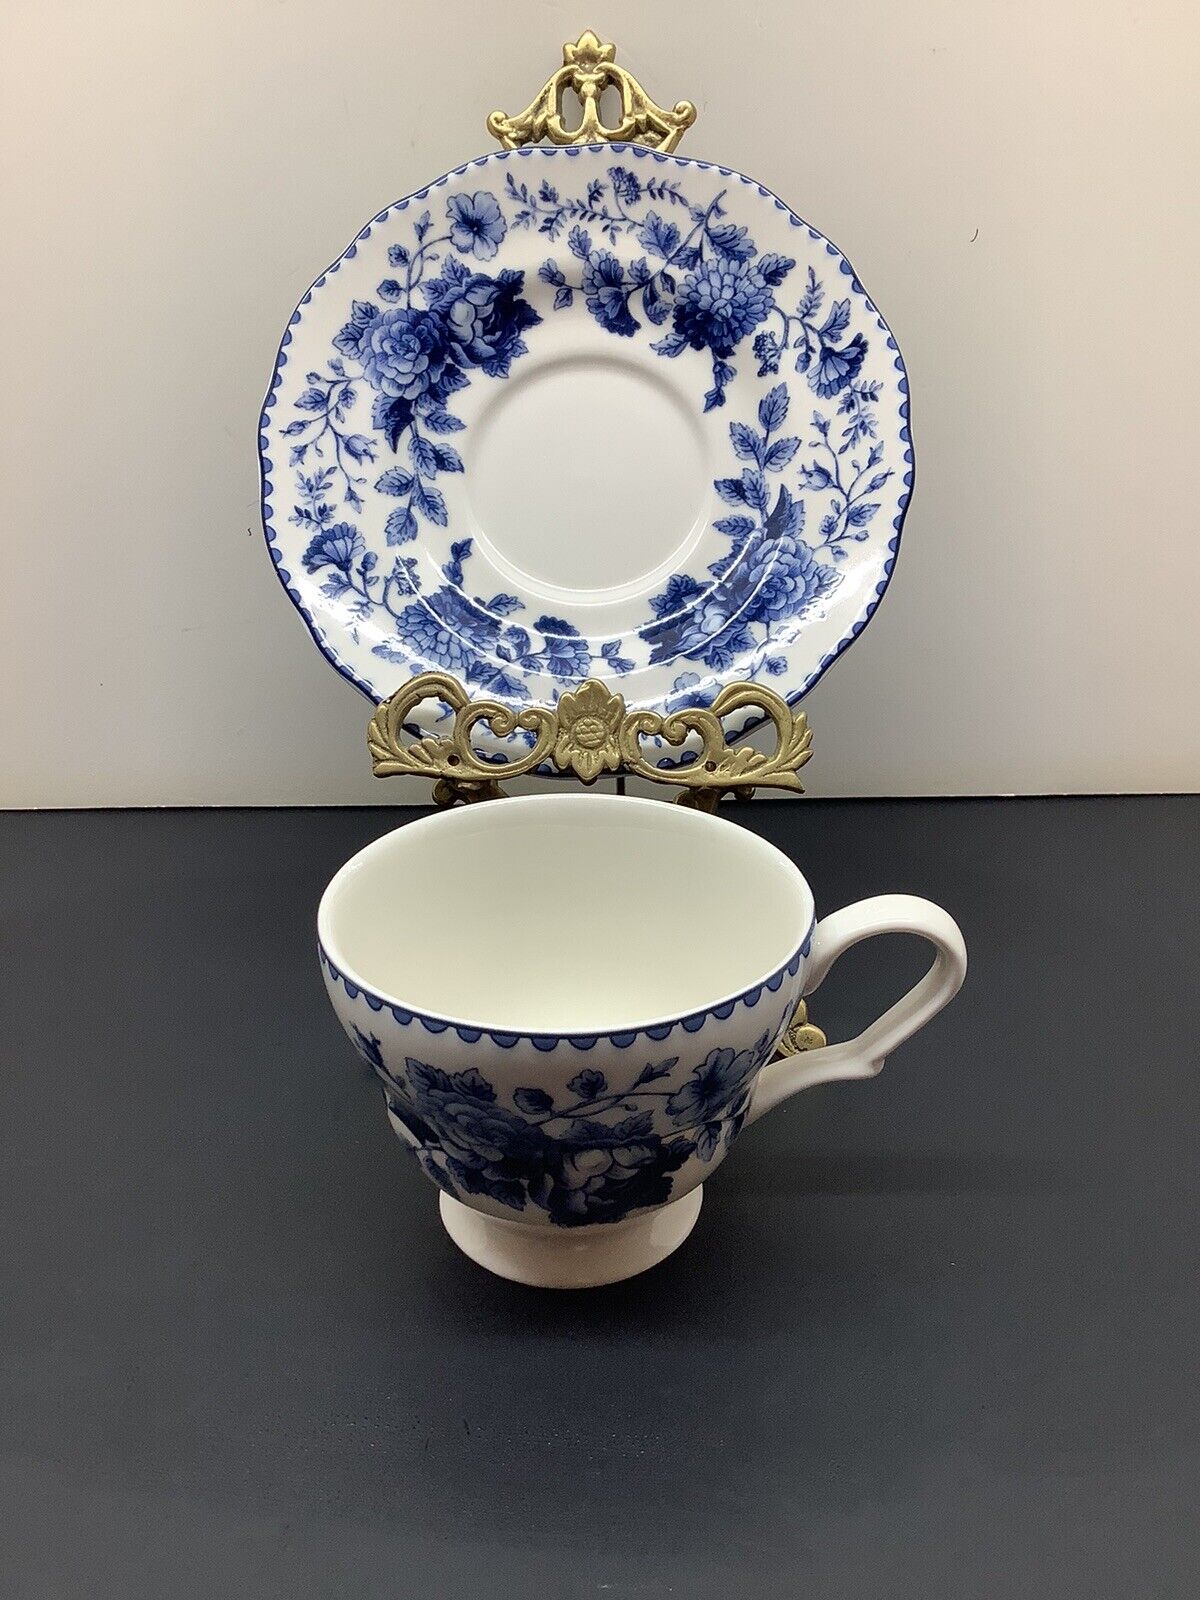 Biltmore Blue Ridge Rose Breakfast Tea Cup & Saucer For Your Home Fine China